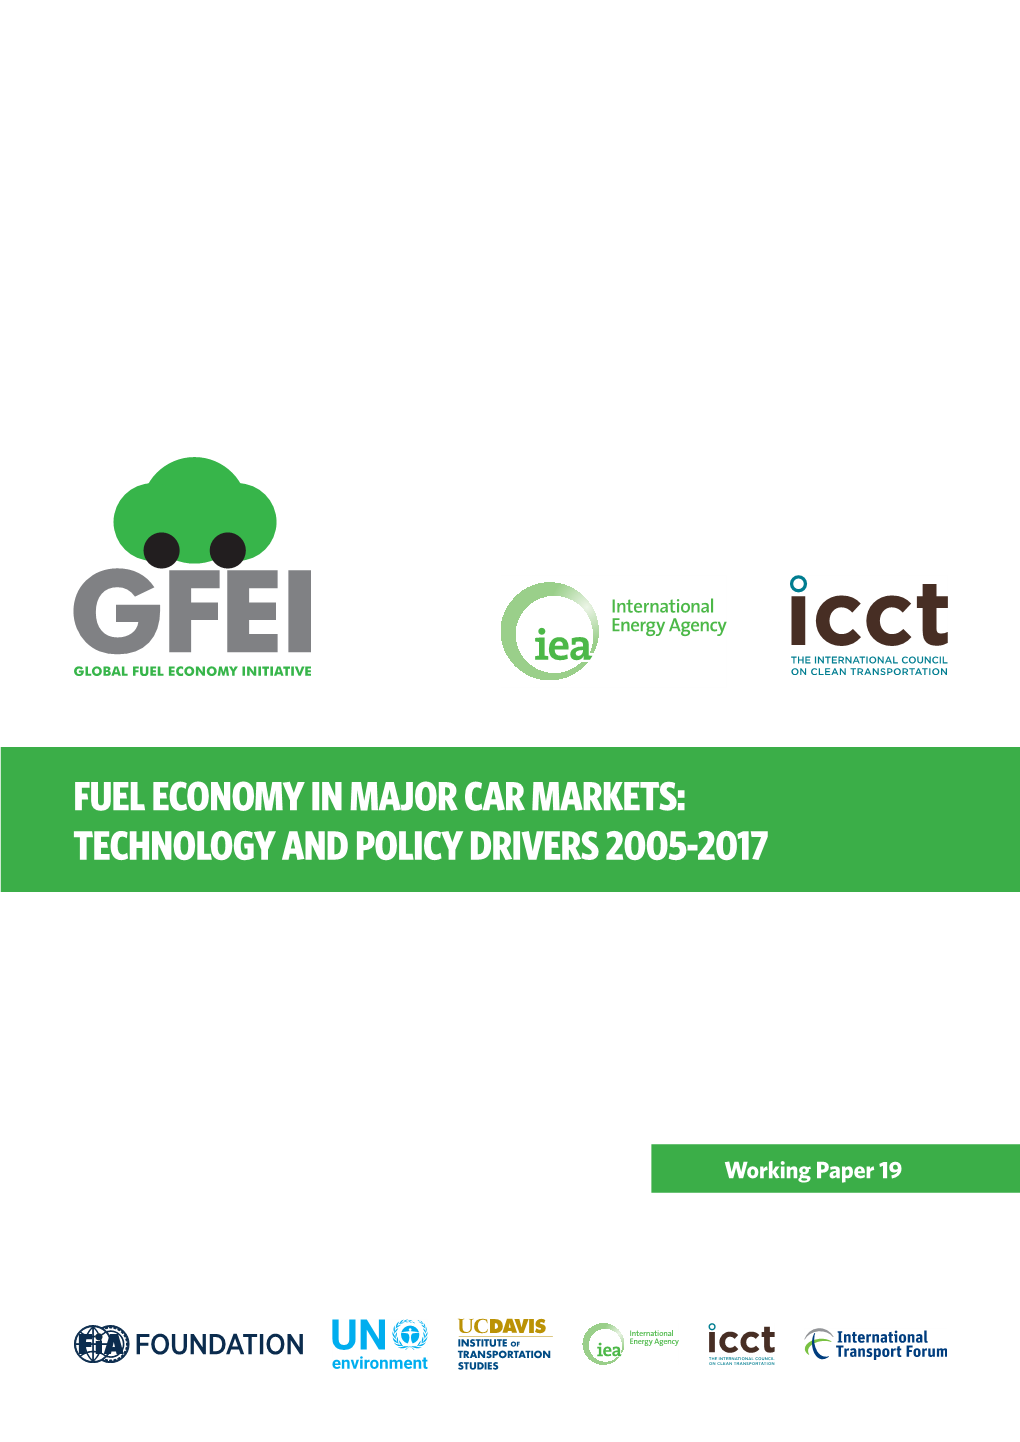 Fuel Economy in Major Car Markets: Technology and Policy Drivers 2005-2017